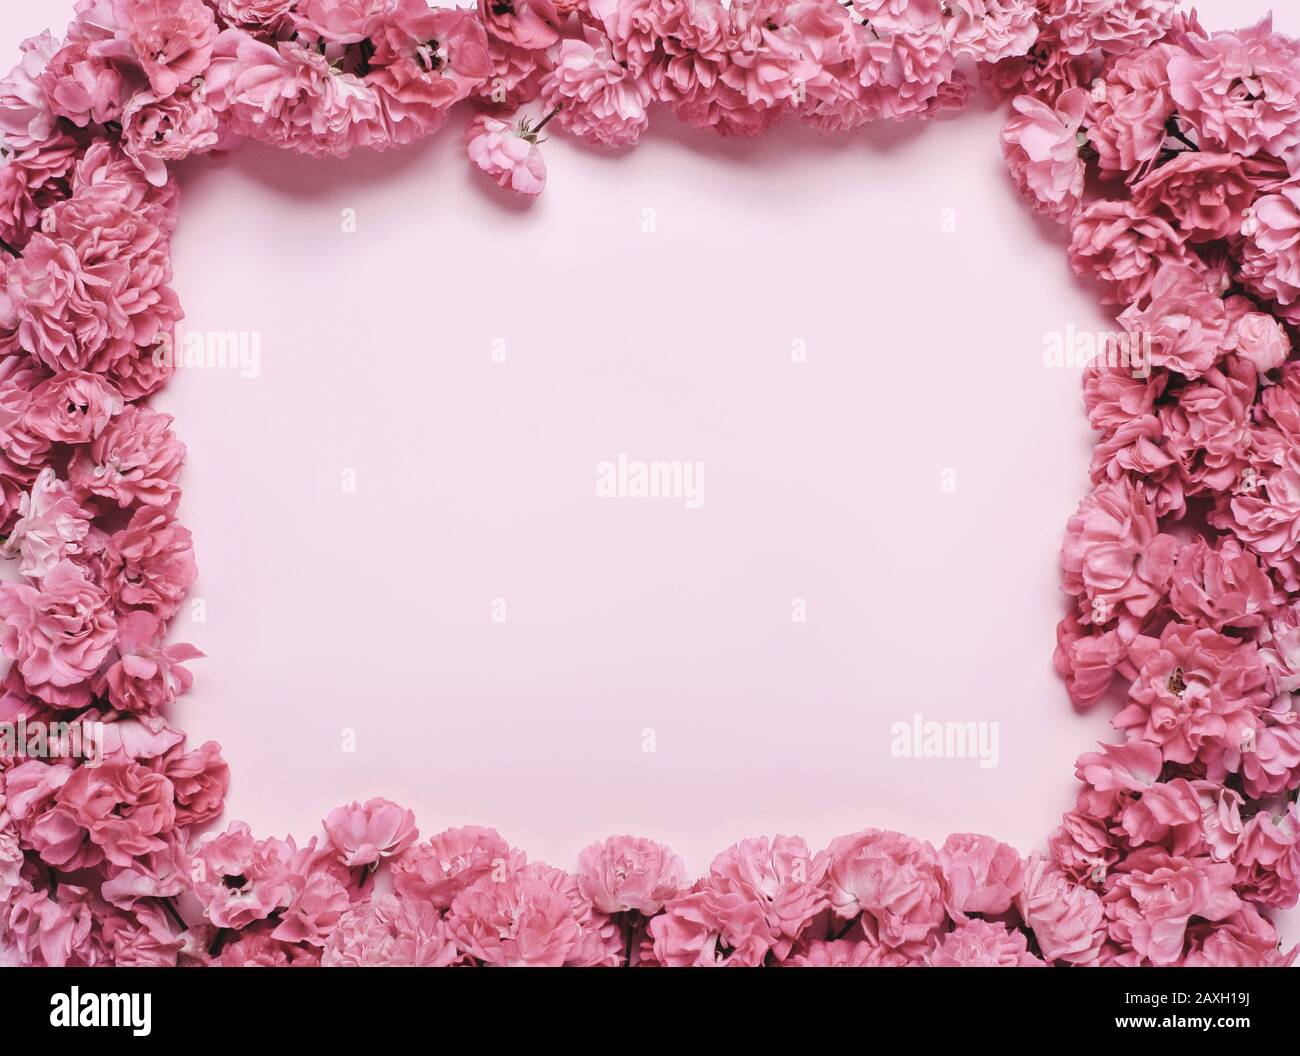 Frame made of coral, pink flowers. Natural holiday lettering letterhead Stock Photo